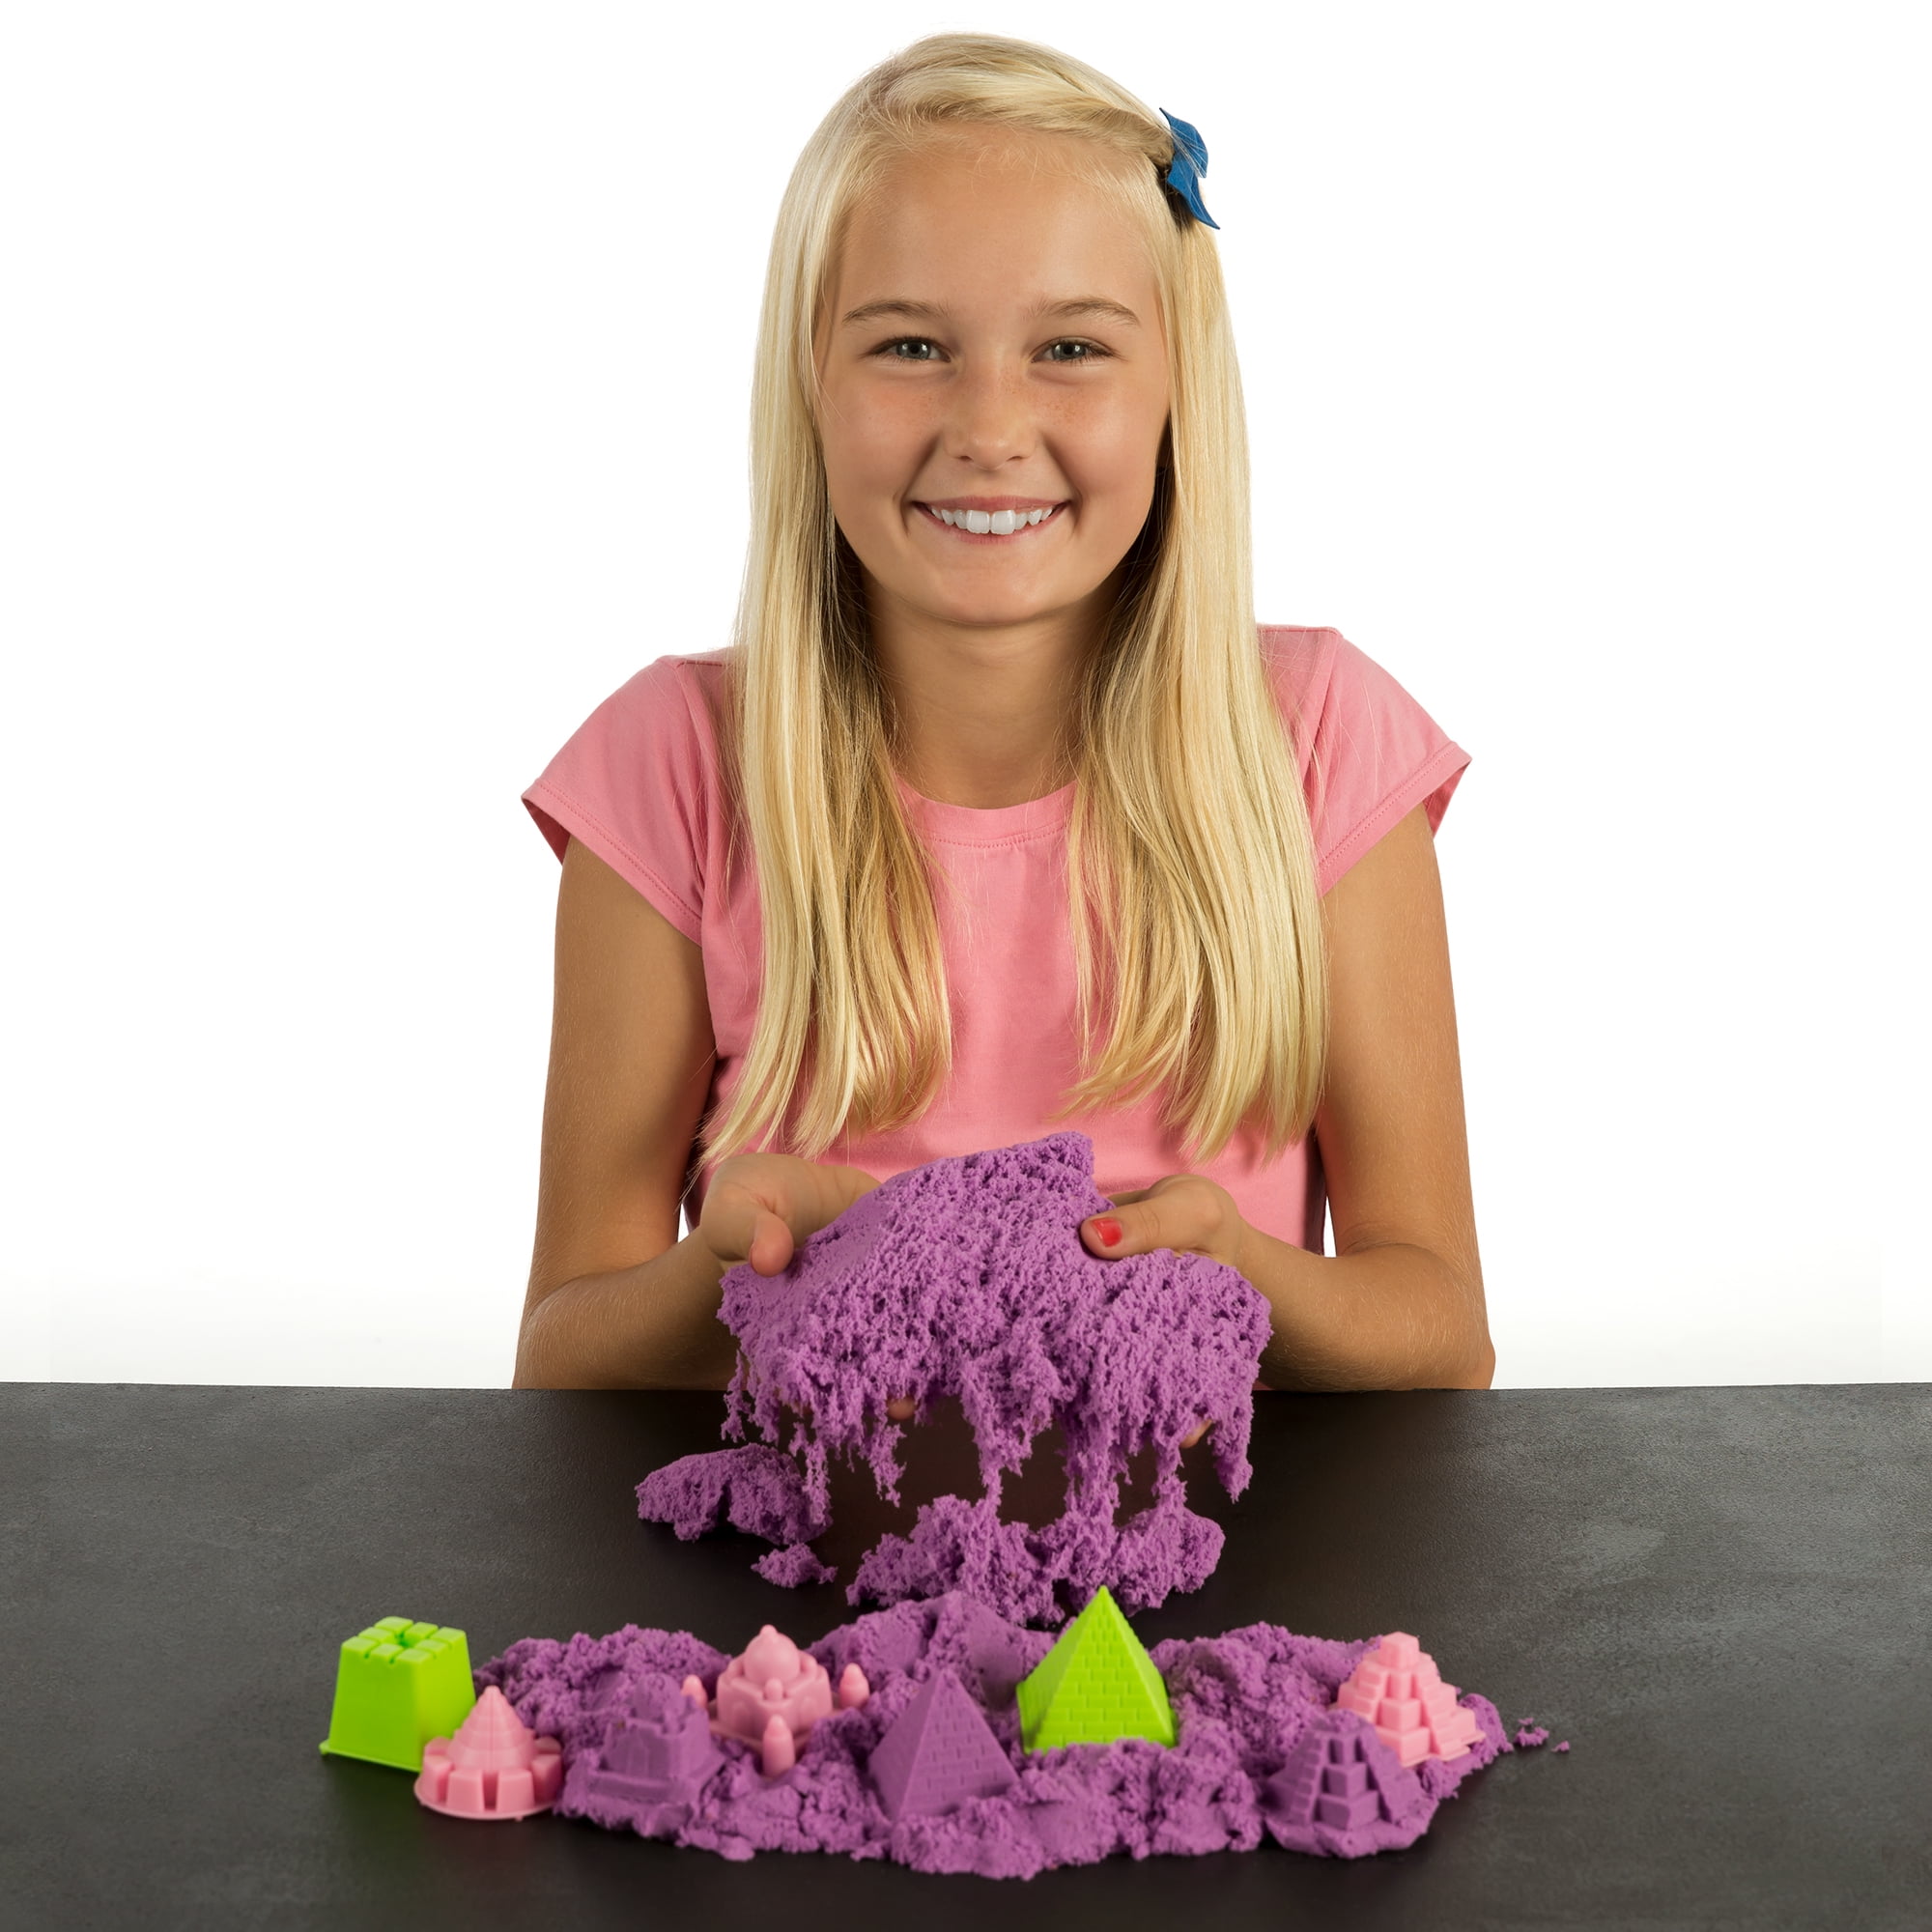 NATIONAL GEOGRAPHIC Play Sand 12 LBS of Sand with Castle Molds - A Kinetic Sensory Activity Purple 